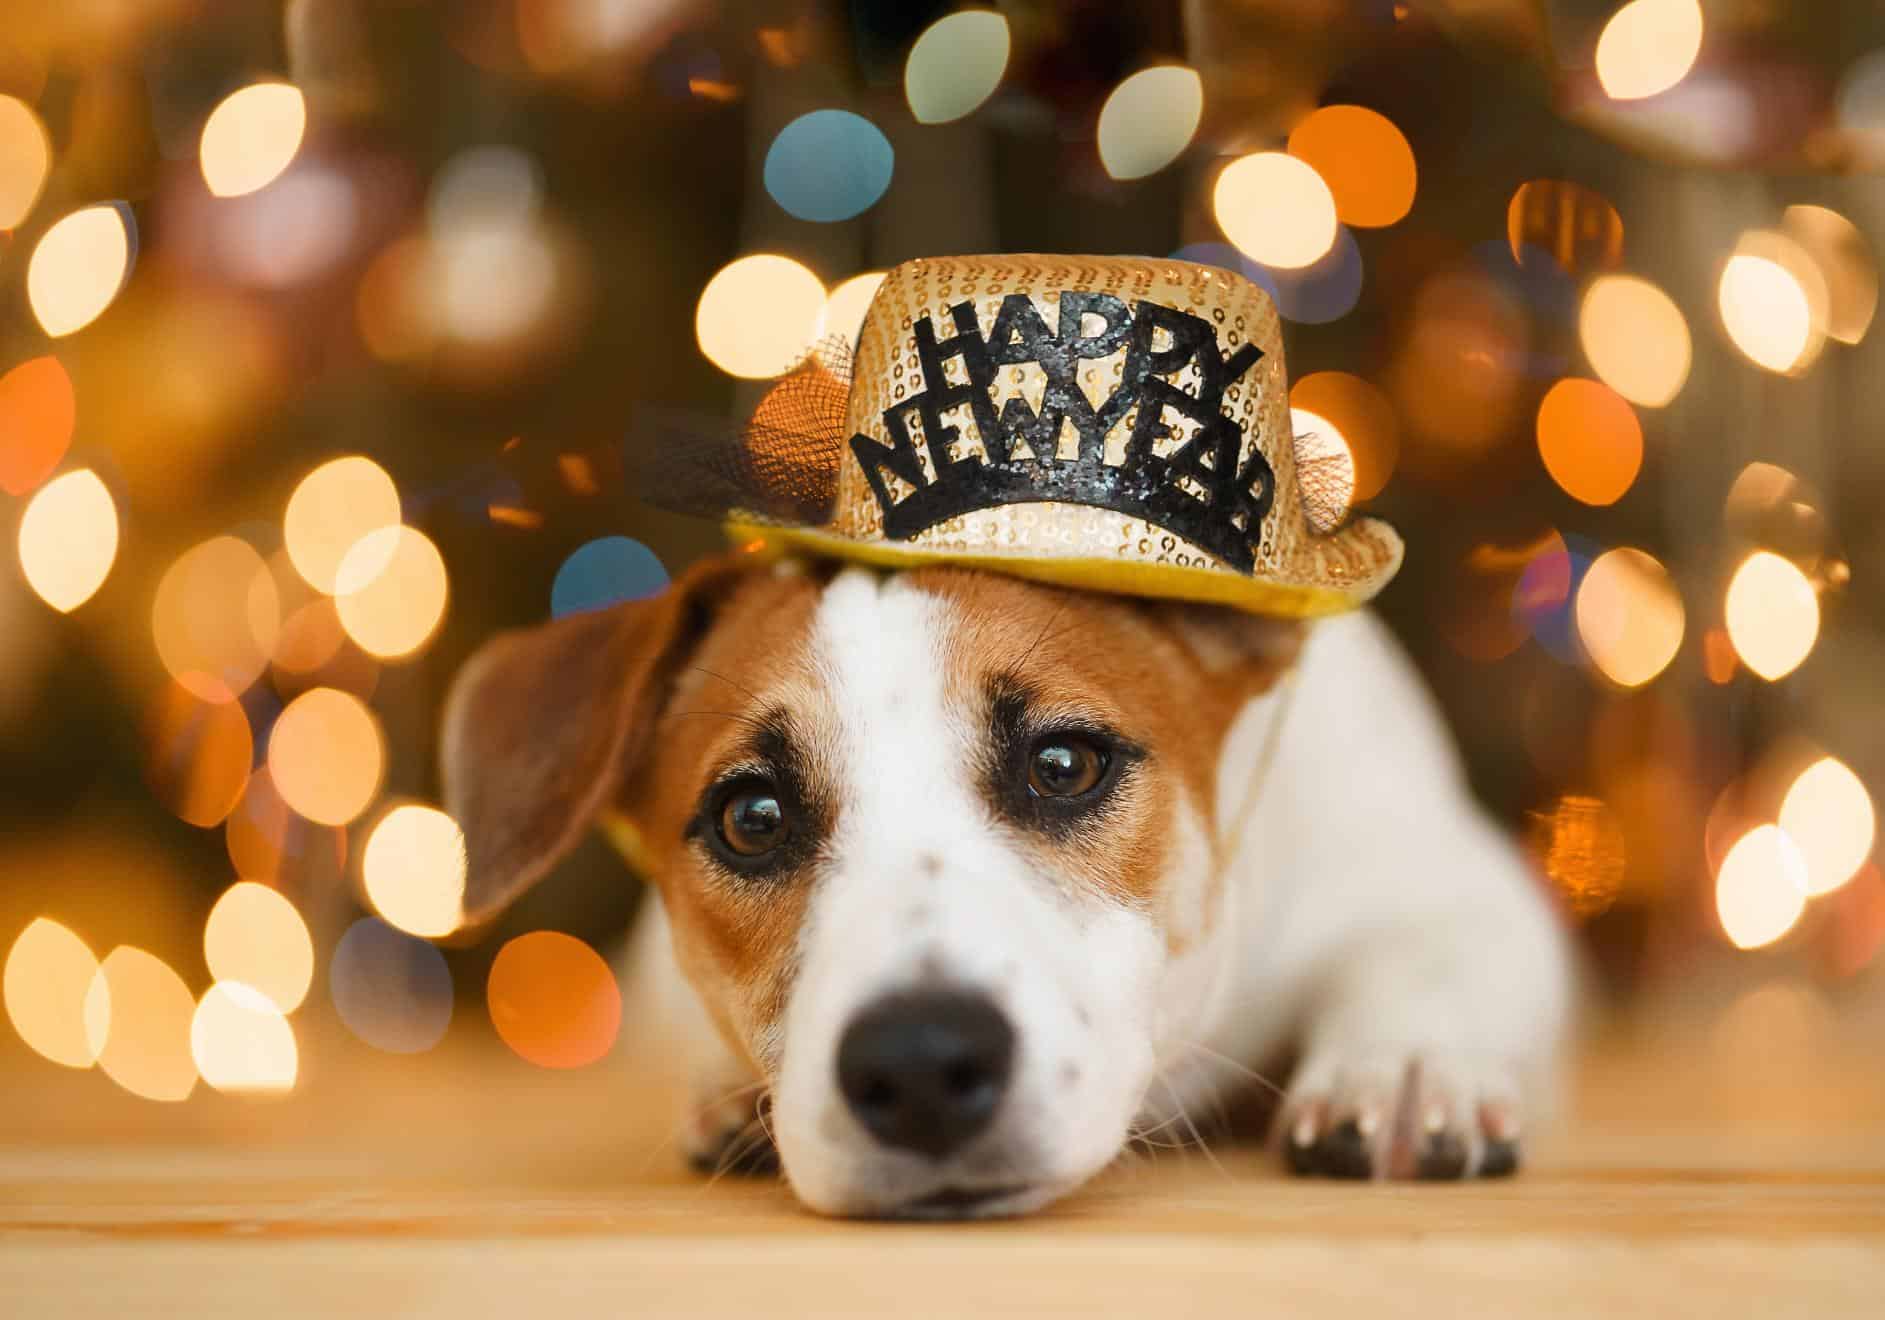 Dog in New Year's hat.